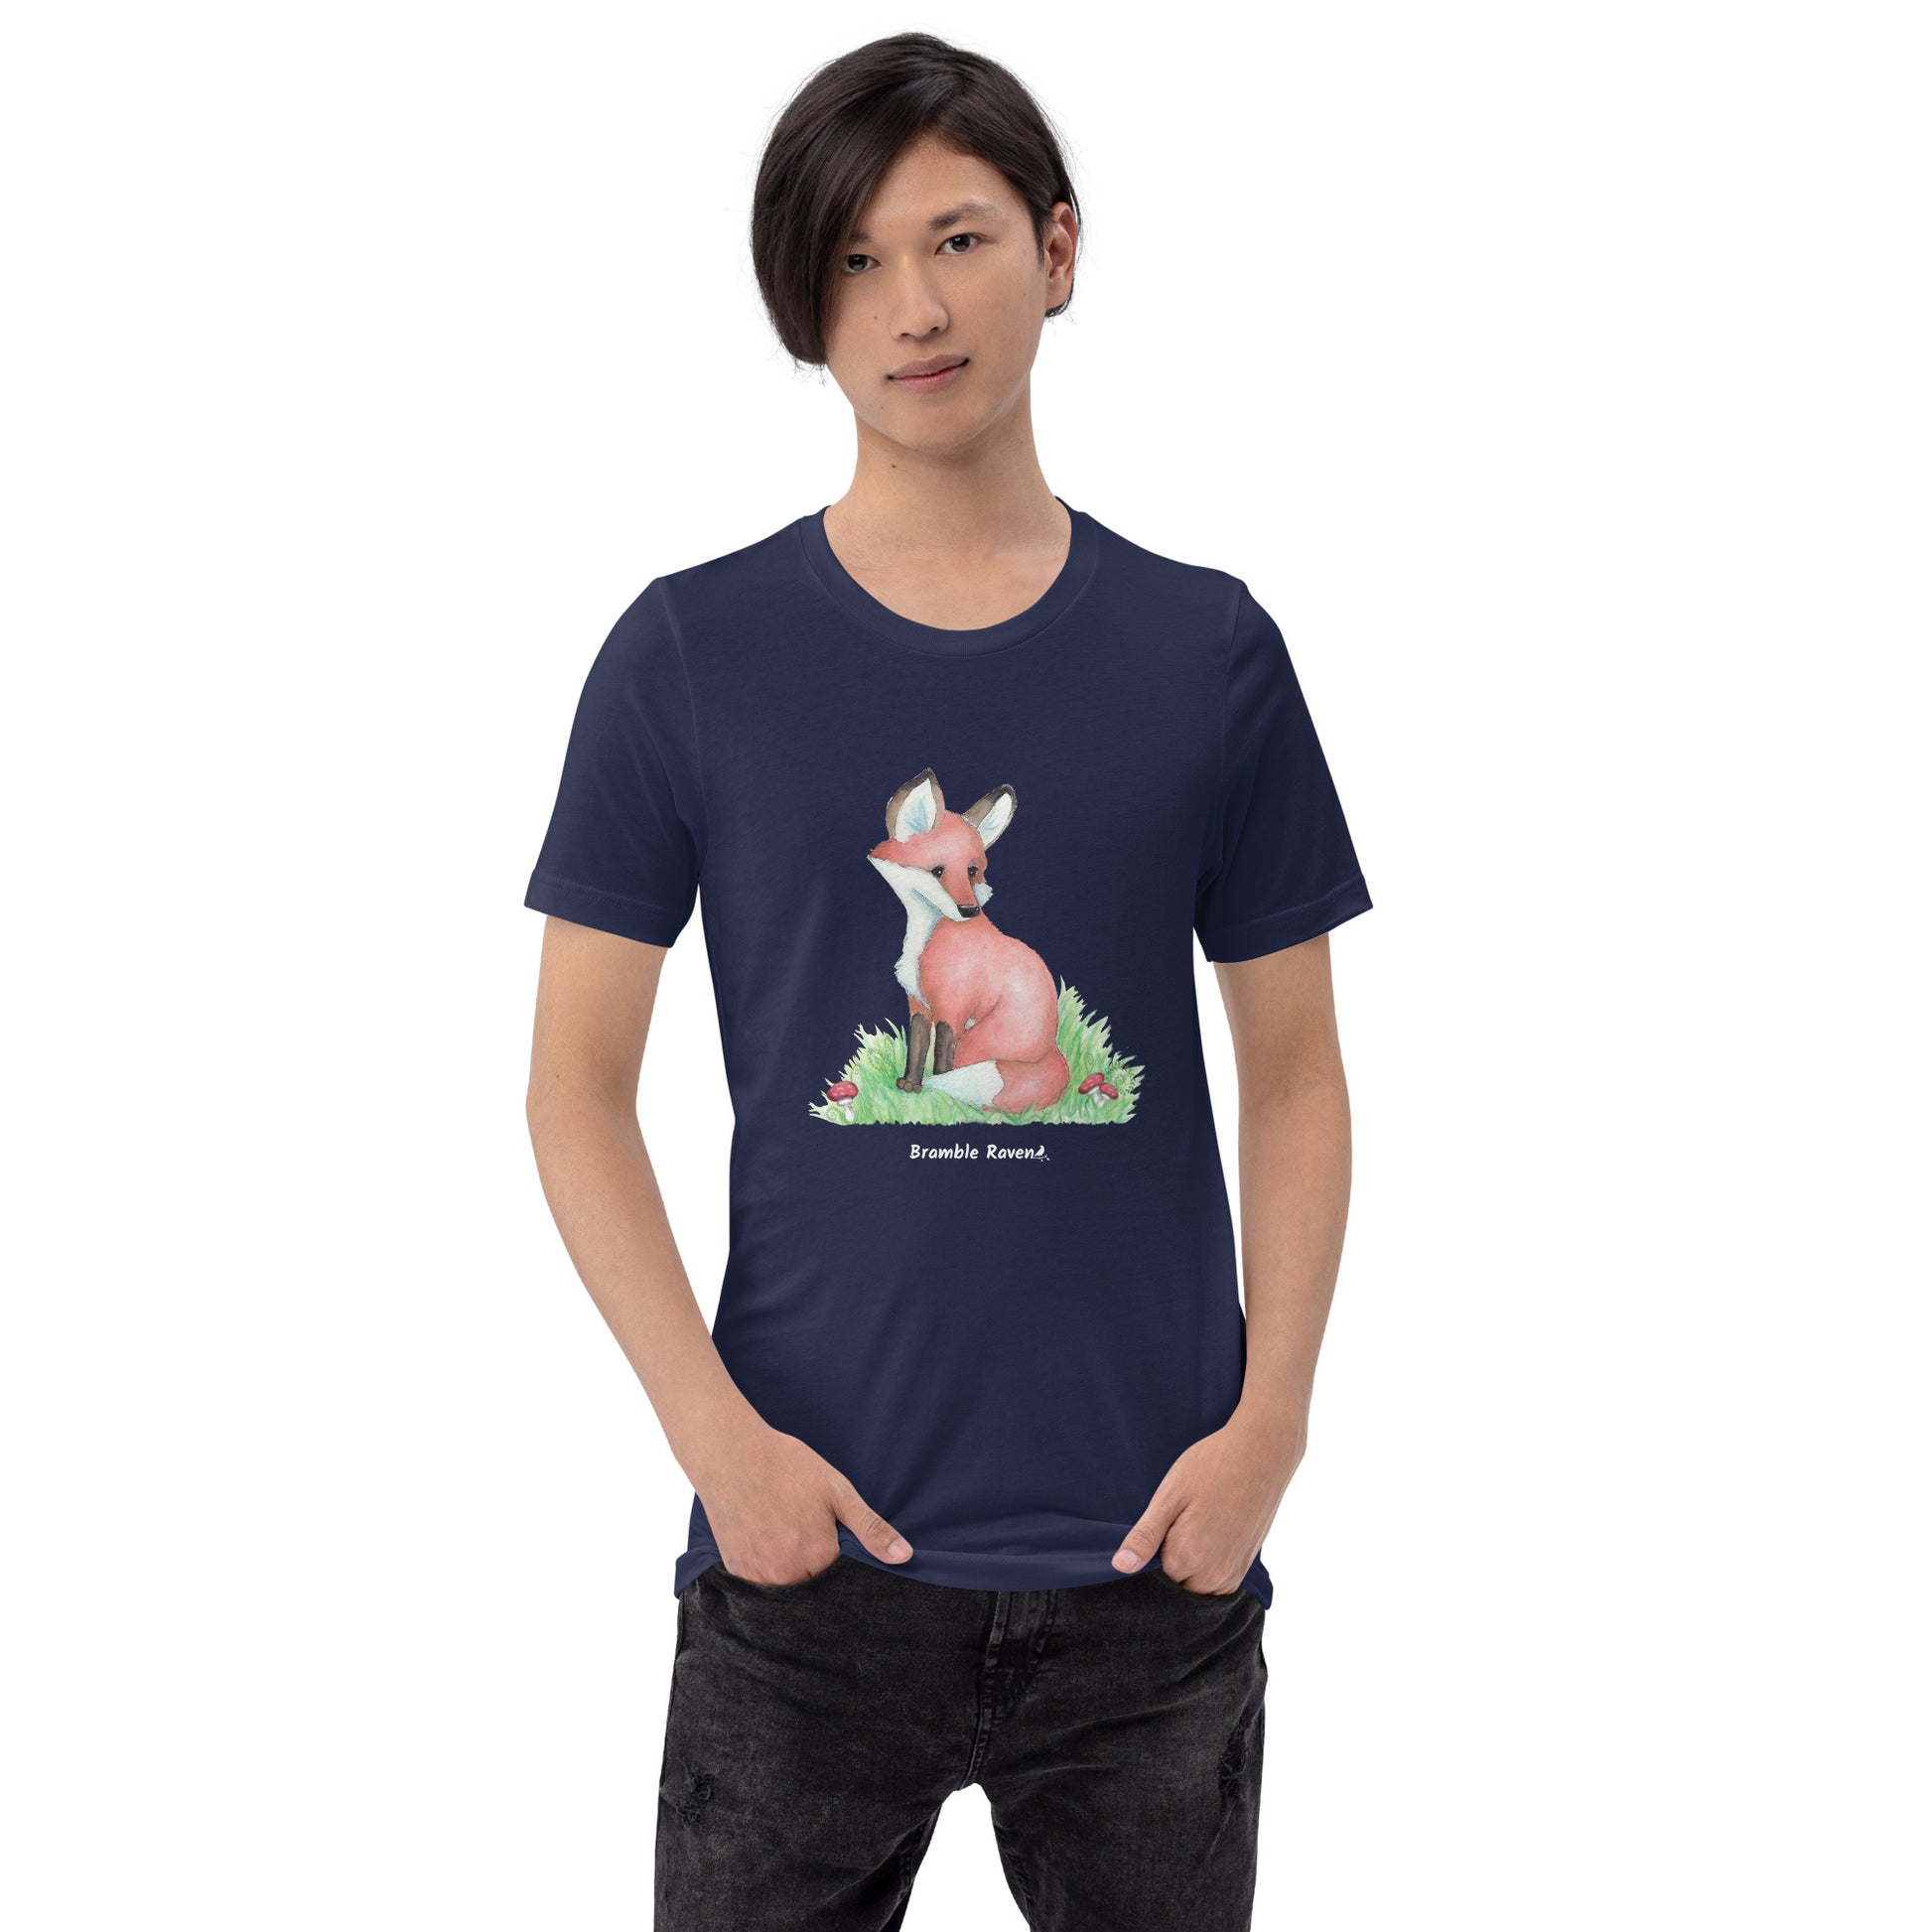 Unisex navy blue colored forest fox t-shirt. Features watercolor print of a fox in the grass surrounded by mushrooms and ferns. Shown on male model.